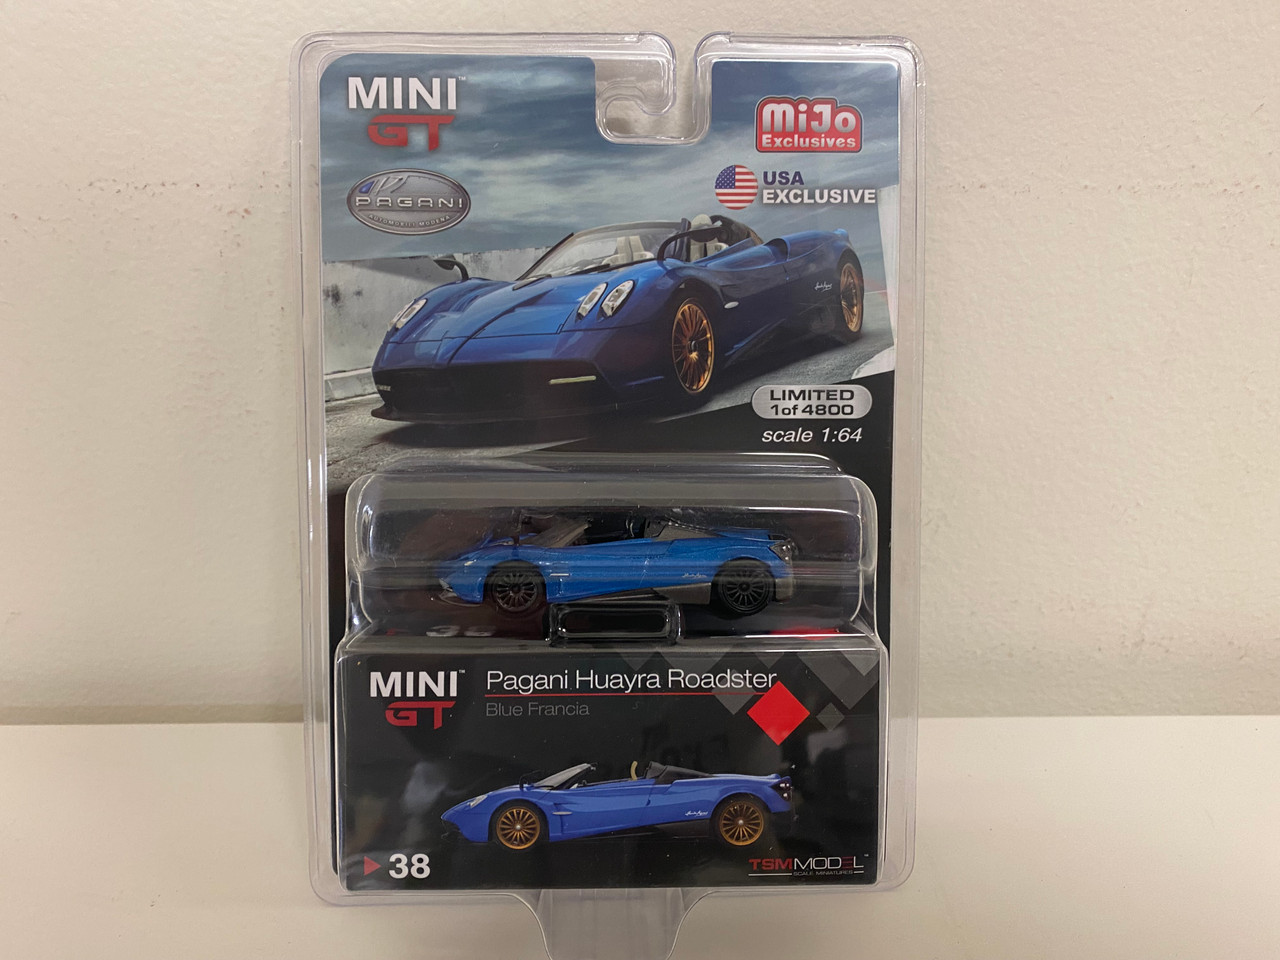 CHASE CAR 1/64 Mini GT Pagani Huayra Roadster Blue with Black Wheels Francia "U.S.A. Exclusive" Limited Edition Diecast Car Model